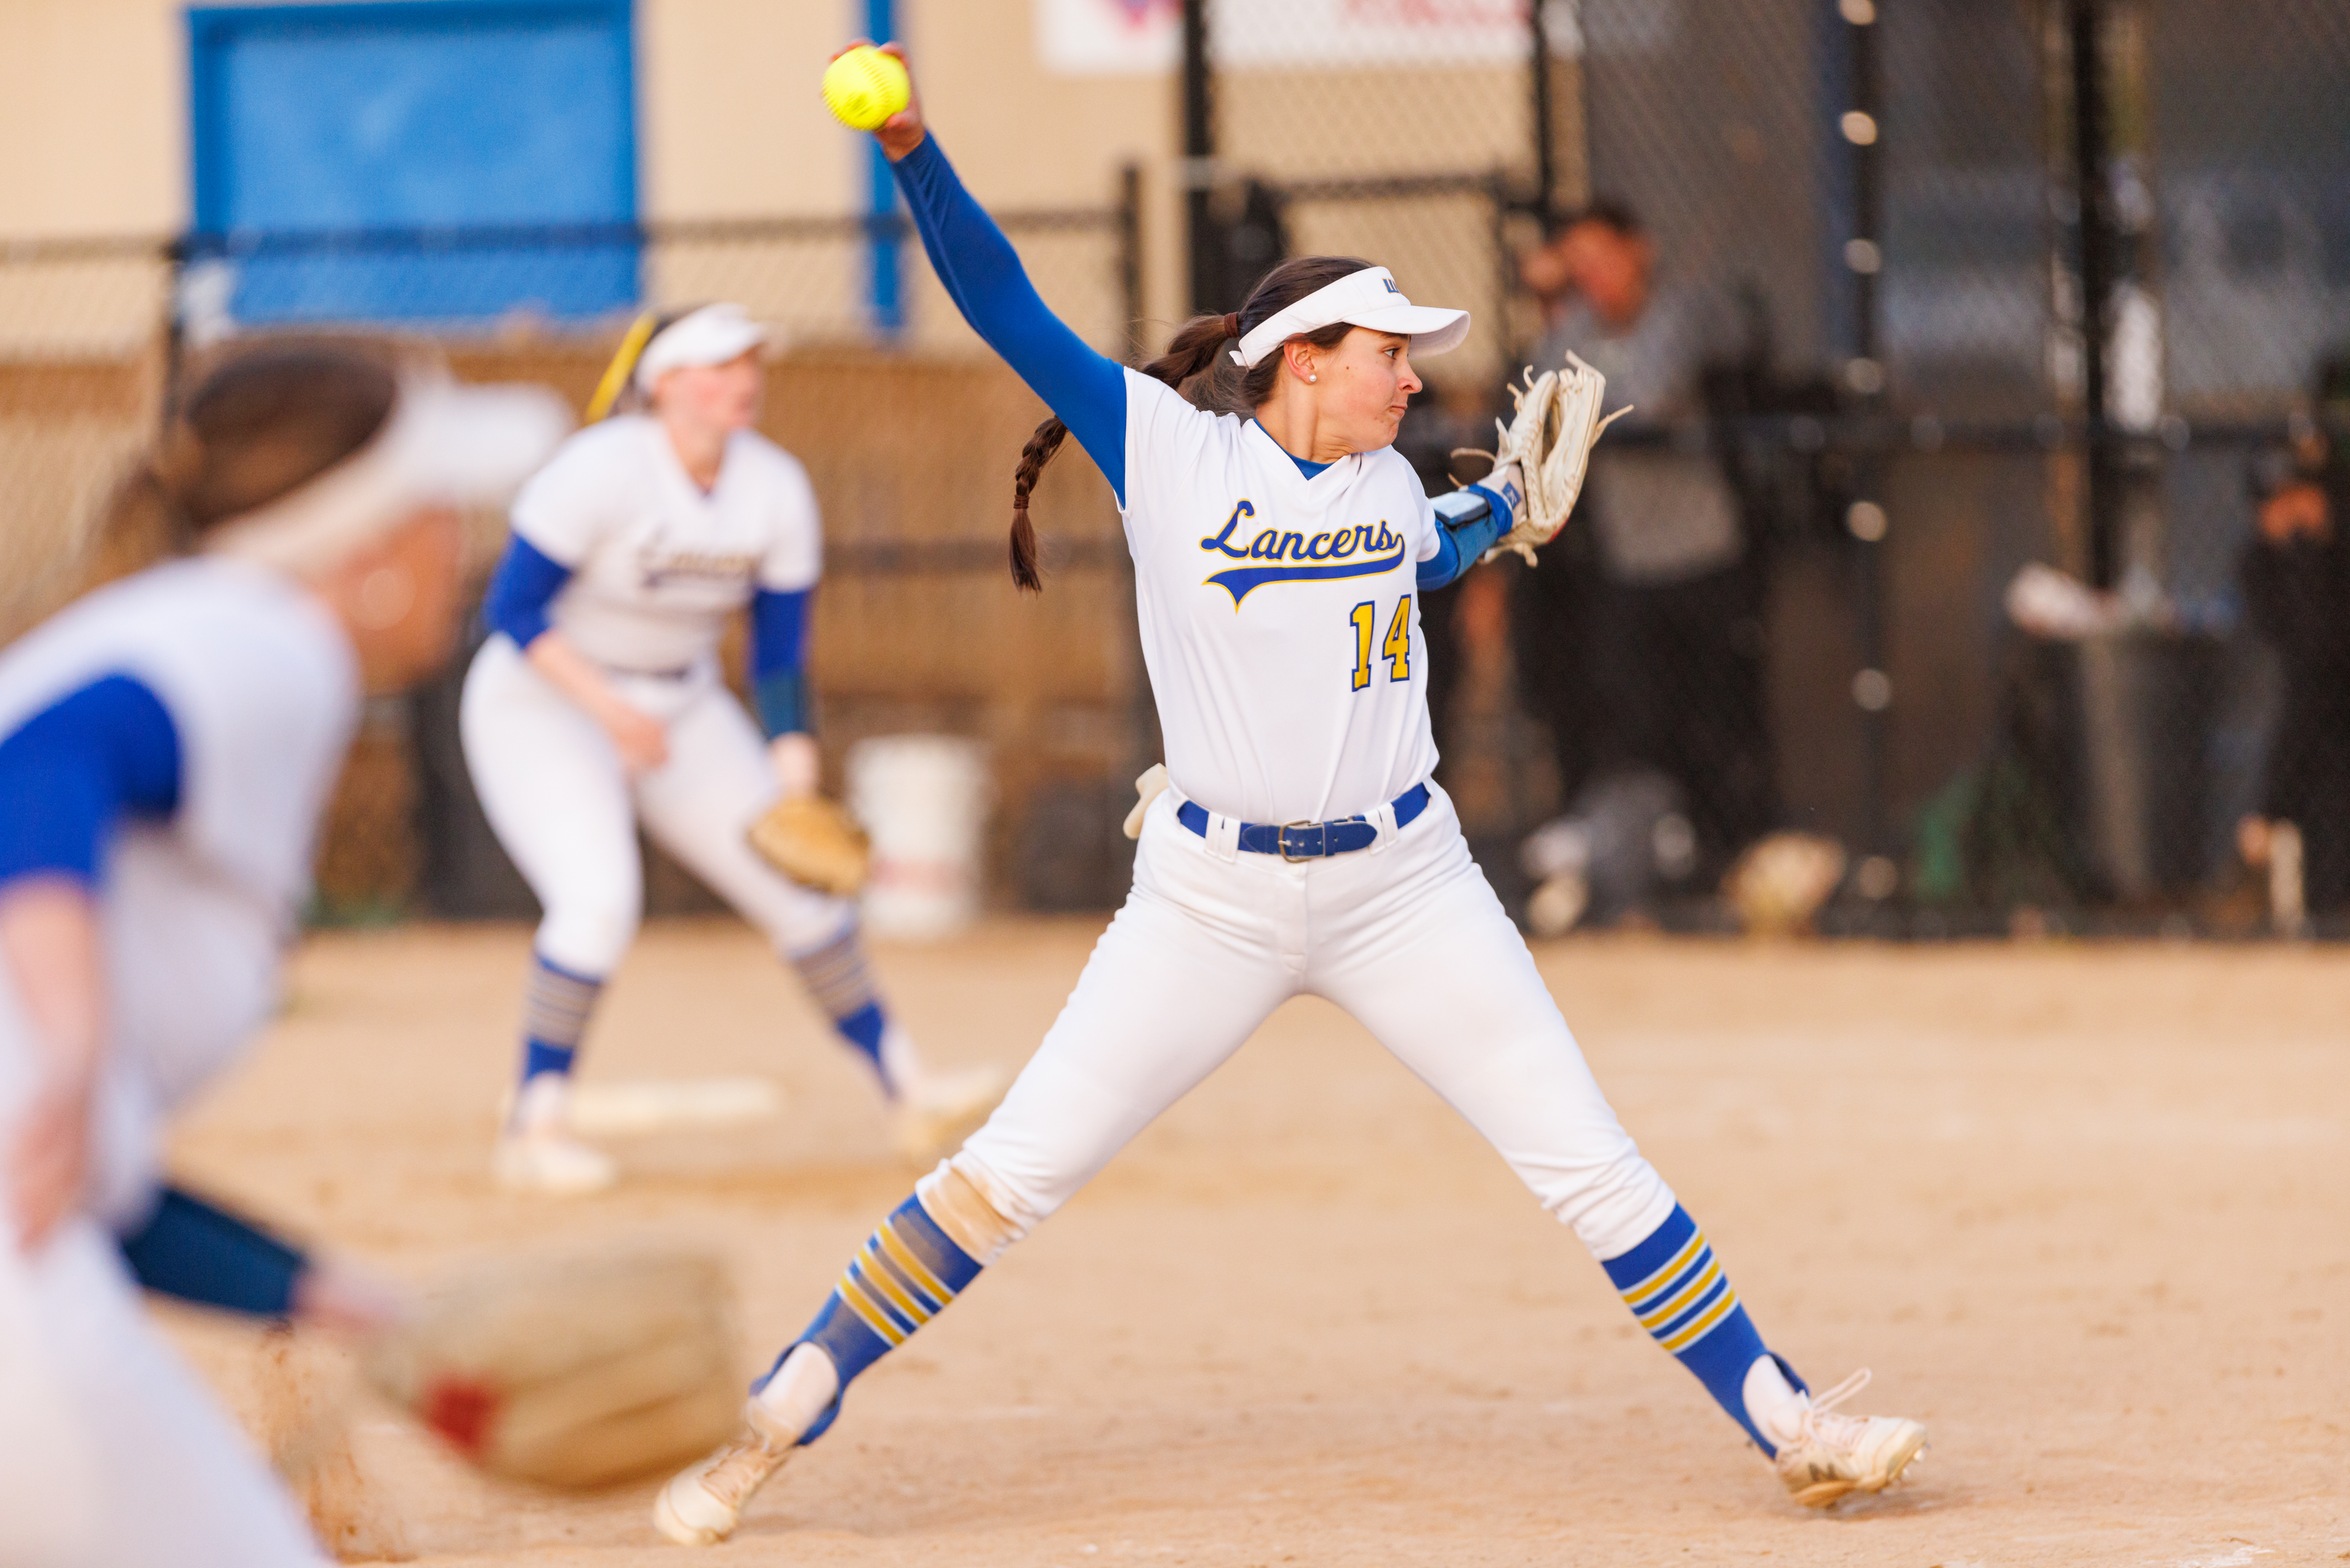 Bartlett Tosses One Hitter In Game One, Lancers Shut Out In Game Two